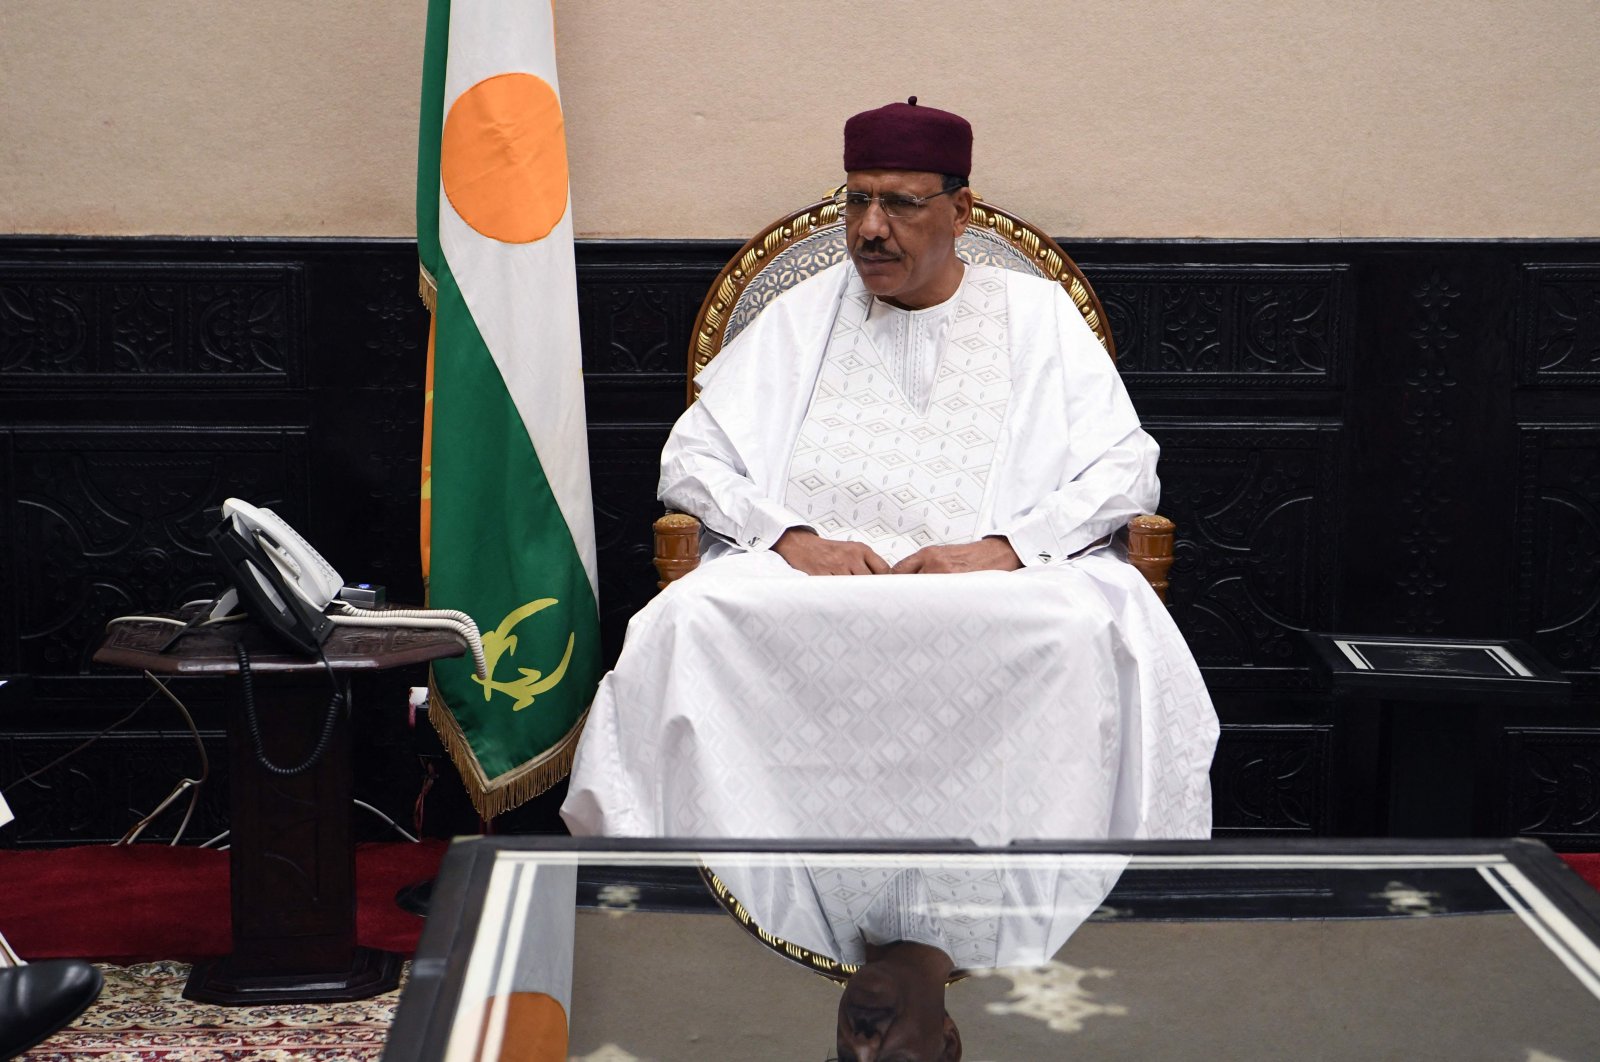 Niger&#039;s President Mohamed Bazoum attends a program in Niamey, Niger, July 15, 2022. (AFP Photo)